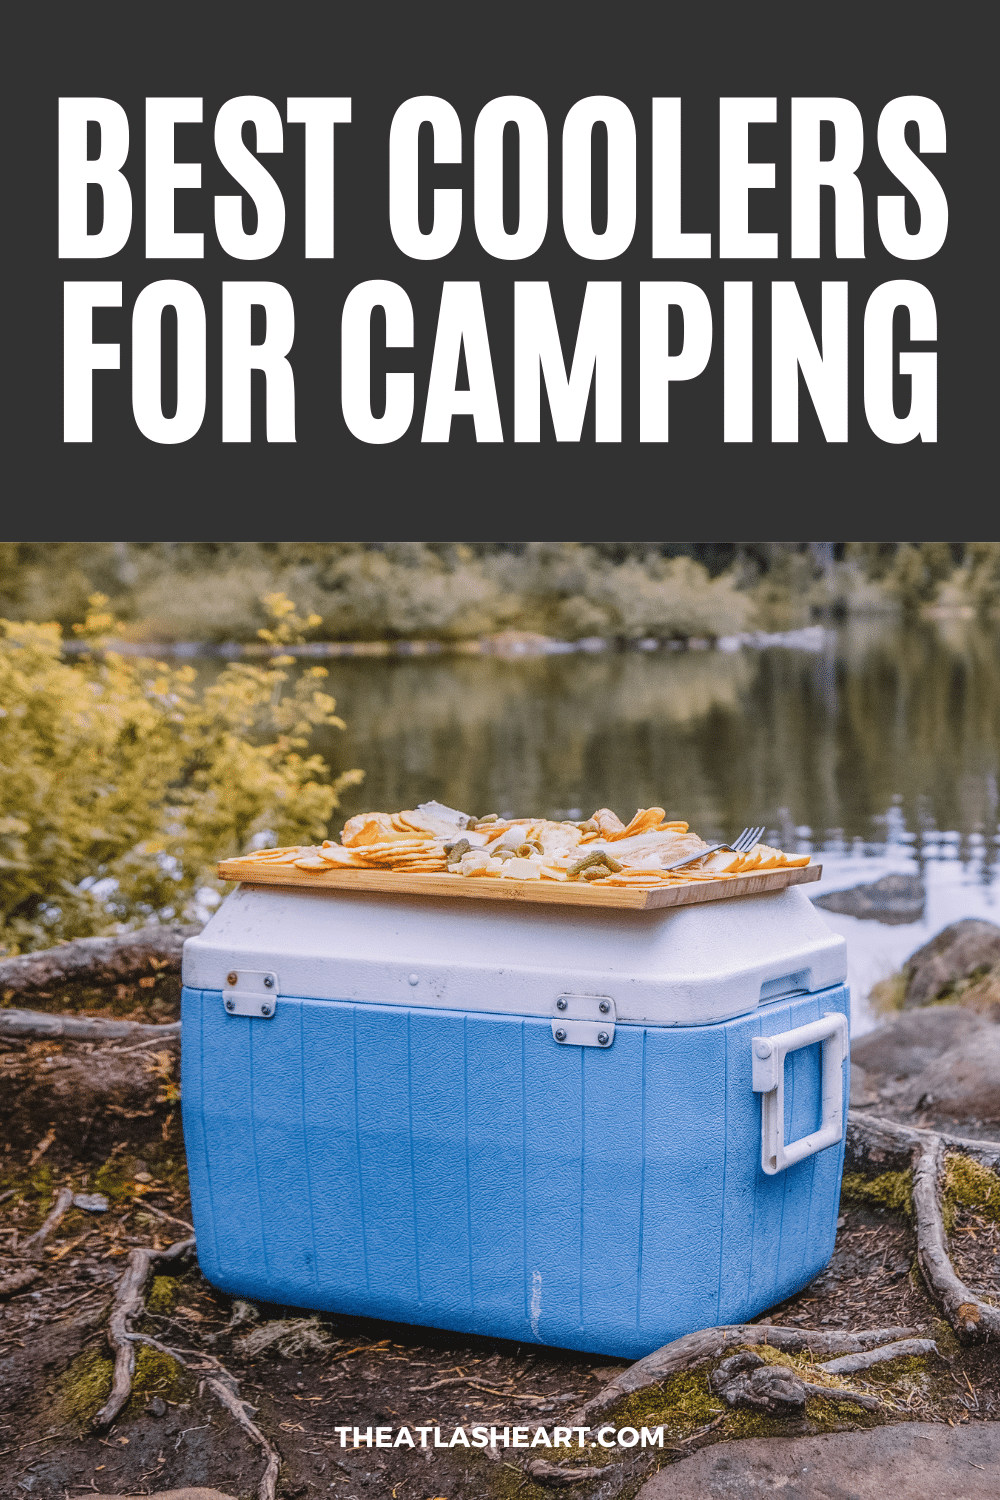 14 Best Coolers for Camping With the Whole Crew in 2022